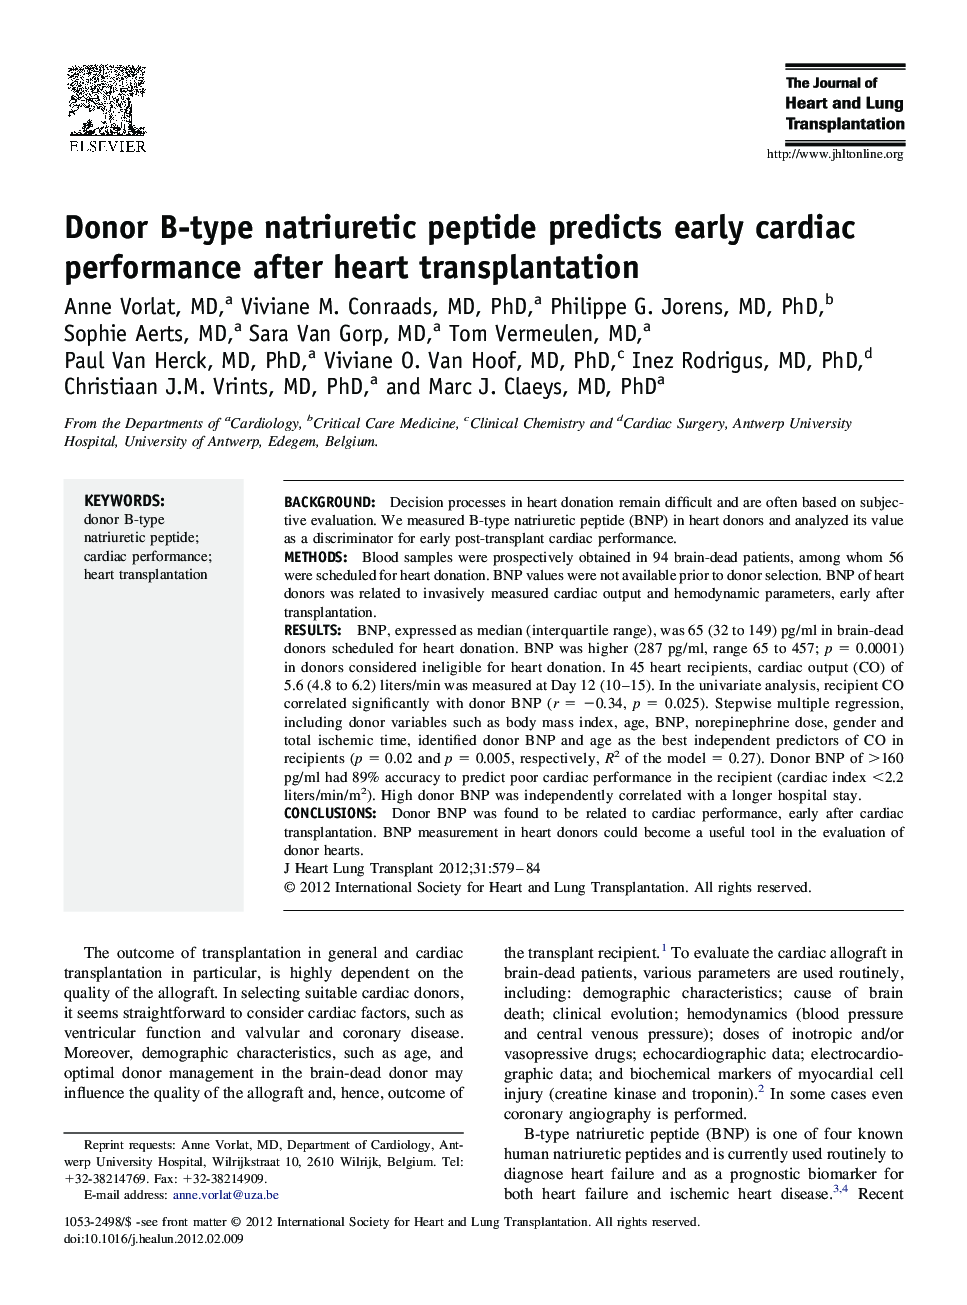 Donor B-type natriuretic peptide predicts early cardiac performance after heart transplantation